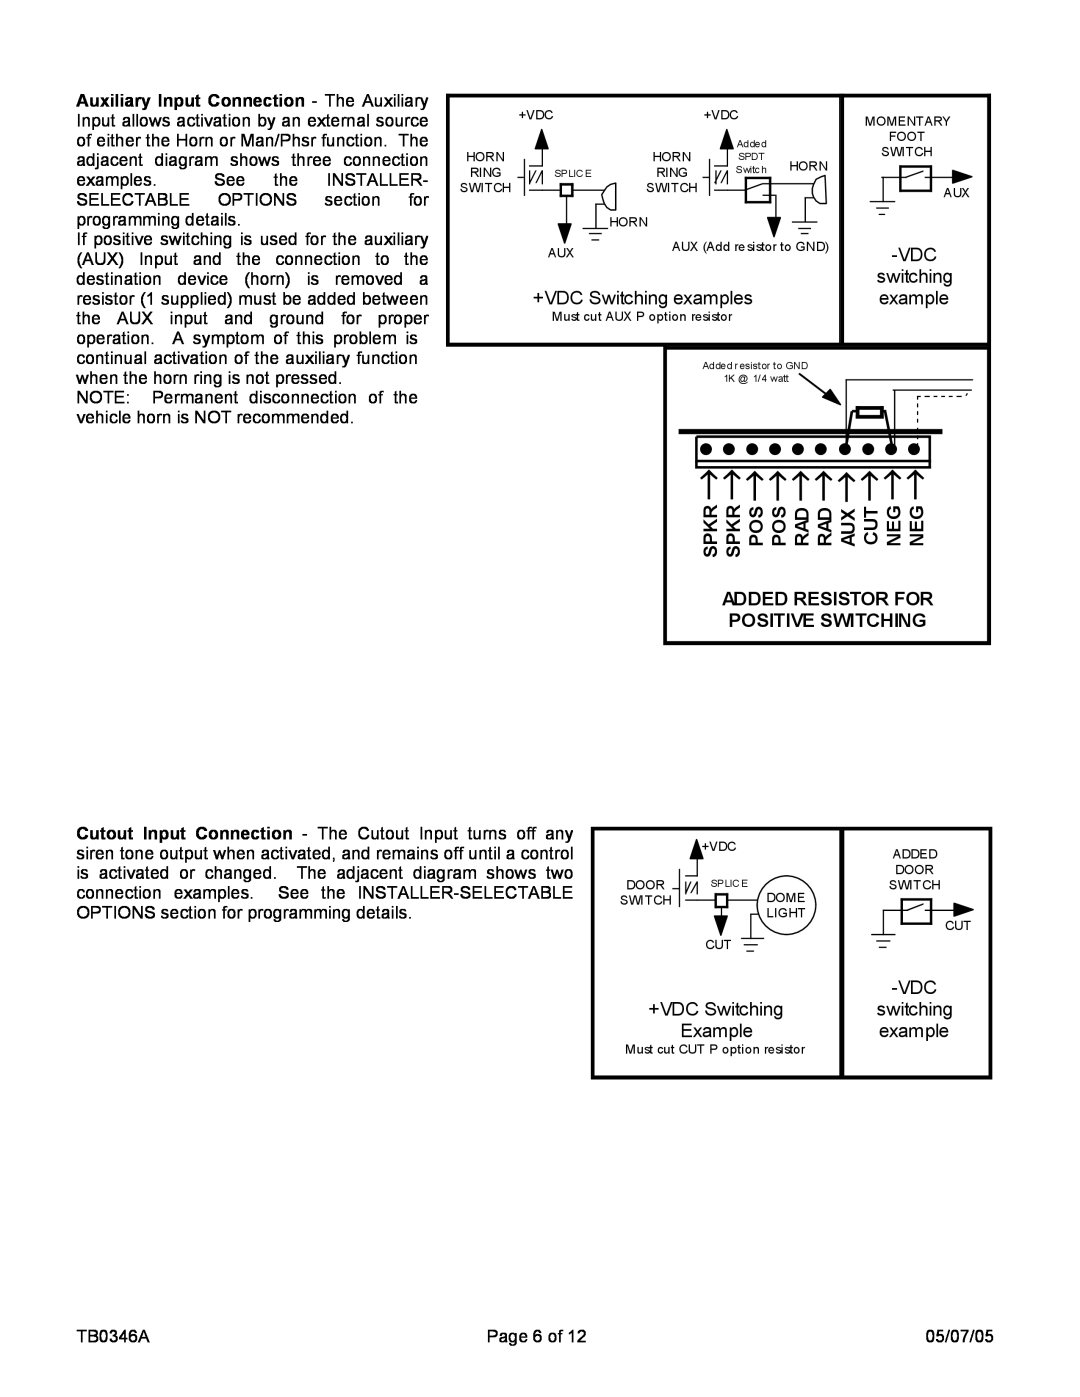 Carson SC-407-10 manual +VDC Switching examples, +VDC Switching Example, VDC switching example 